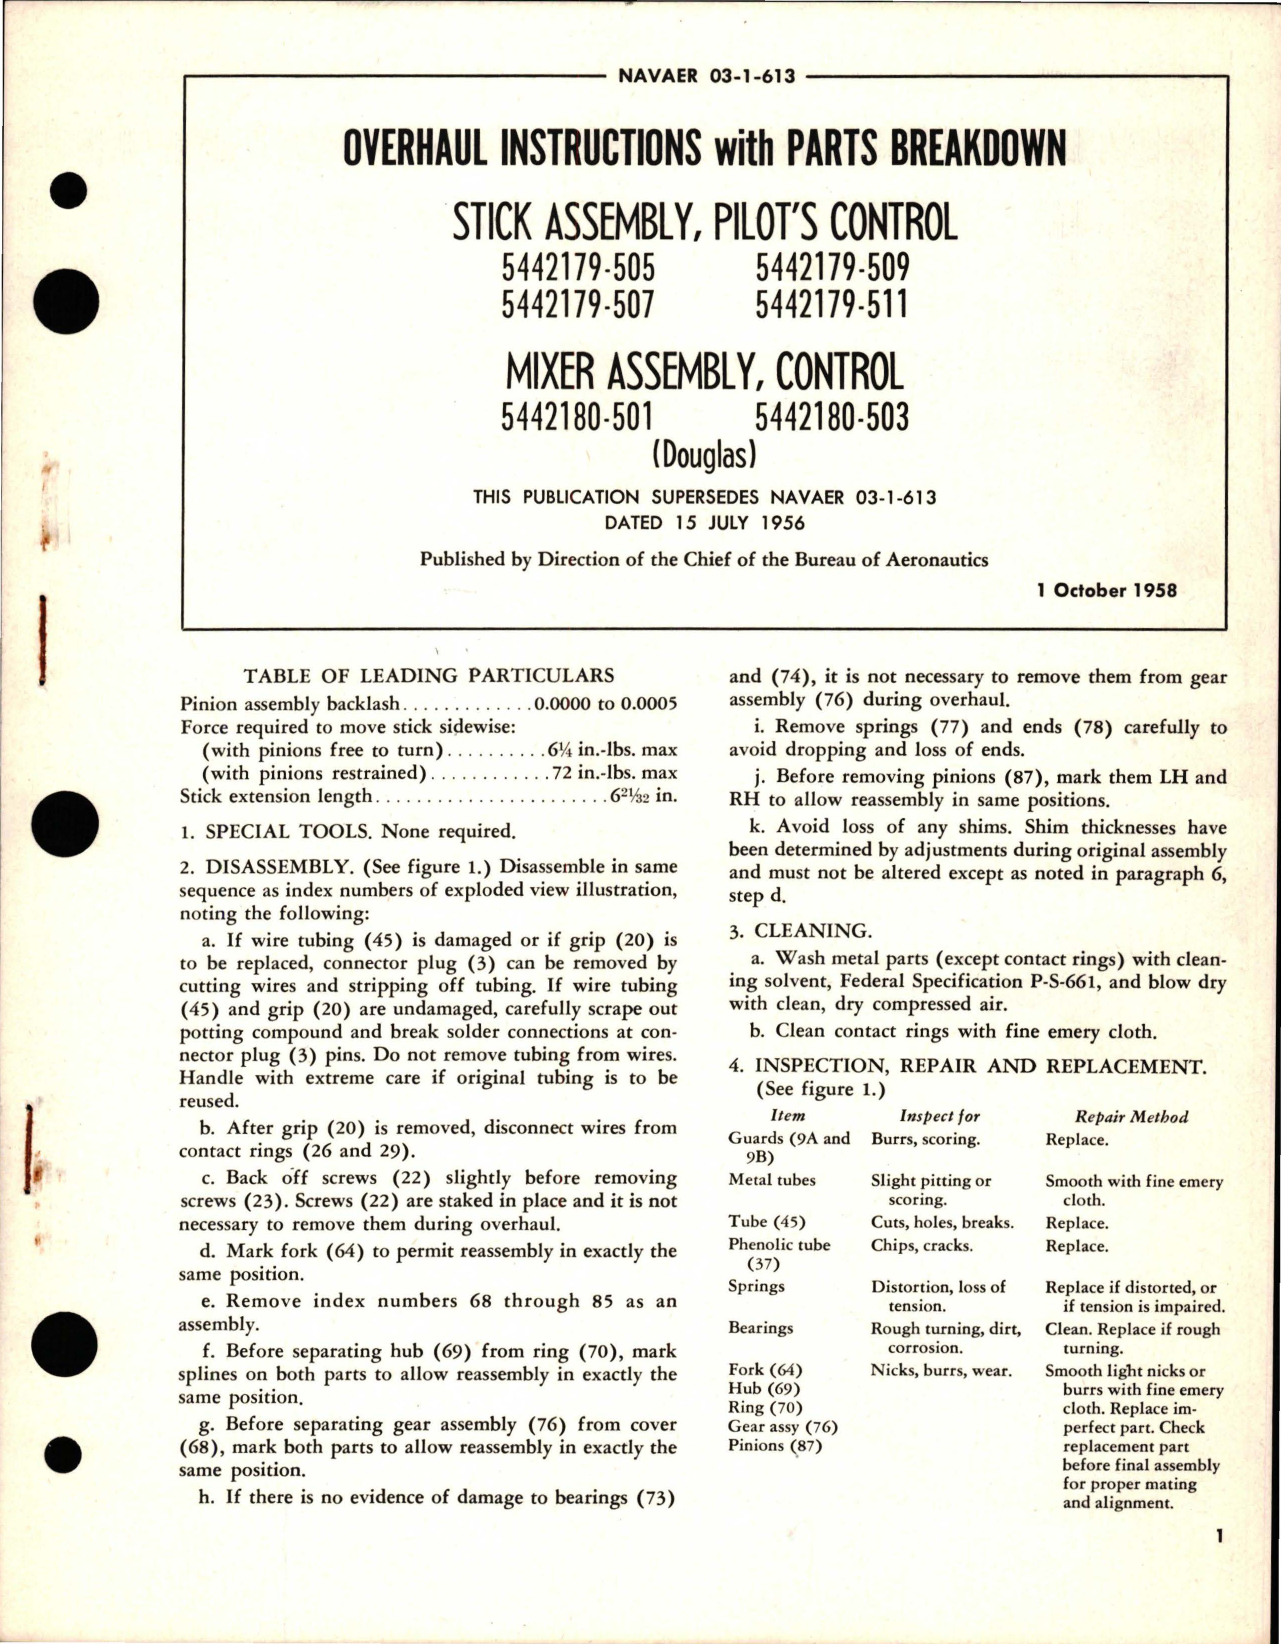 Sample page 1 from AirCorps Library document: Overhaul Instructions with Parts Breakdown for Pilot's Control Stick Assembly and Control Mixer Assembly